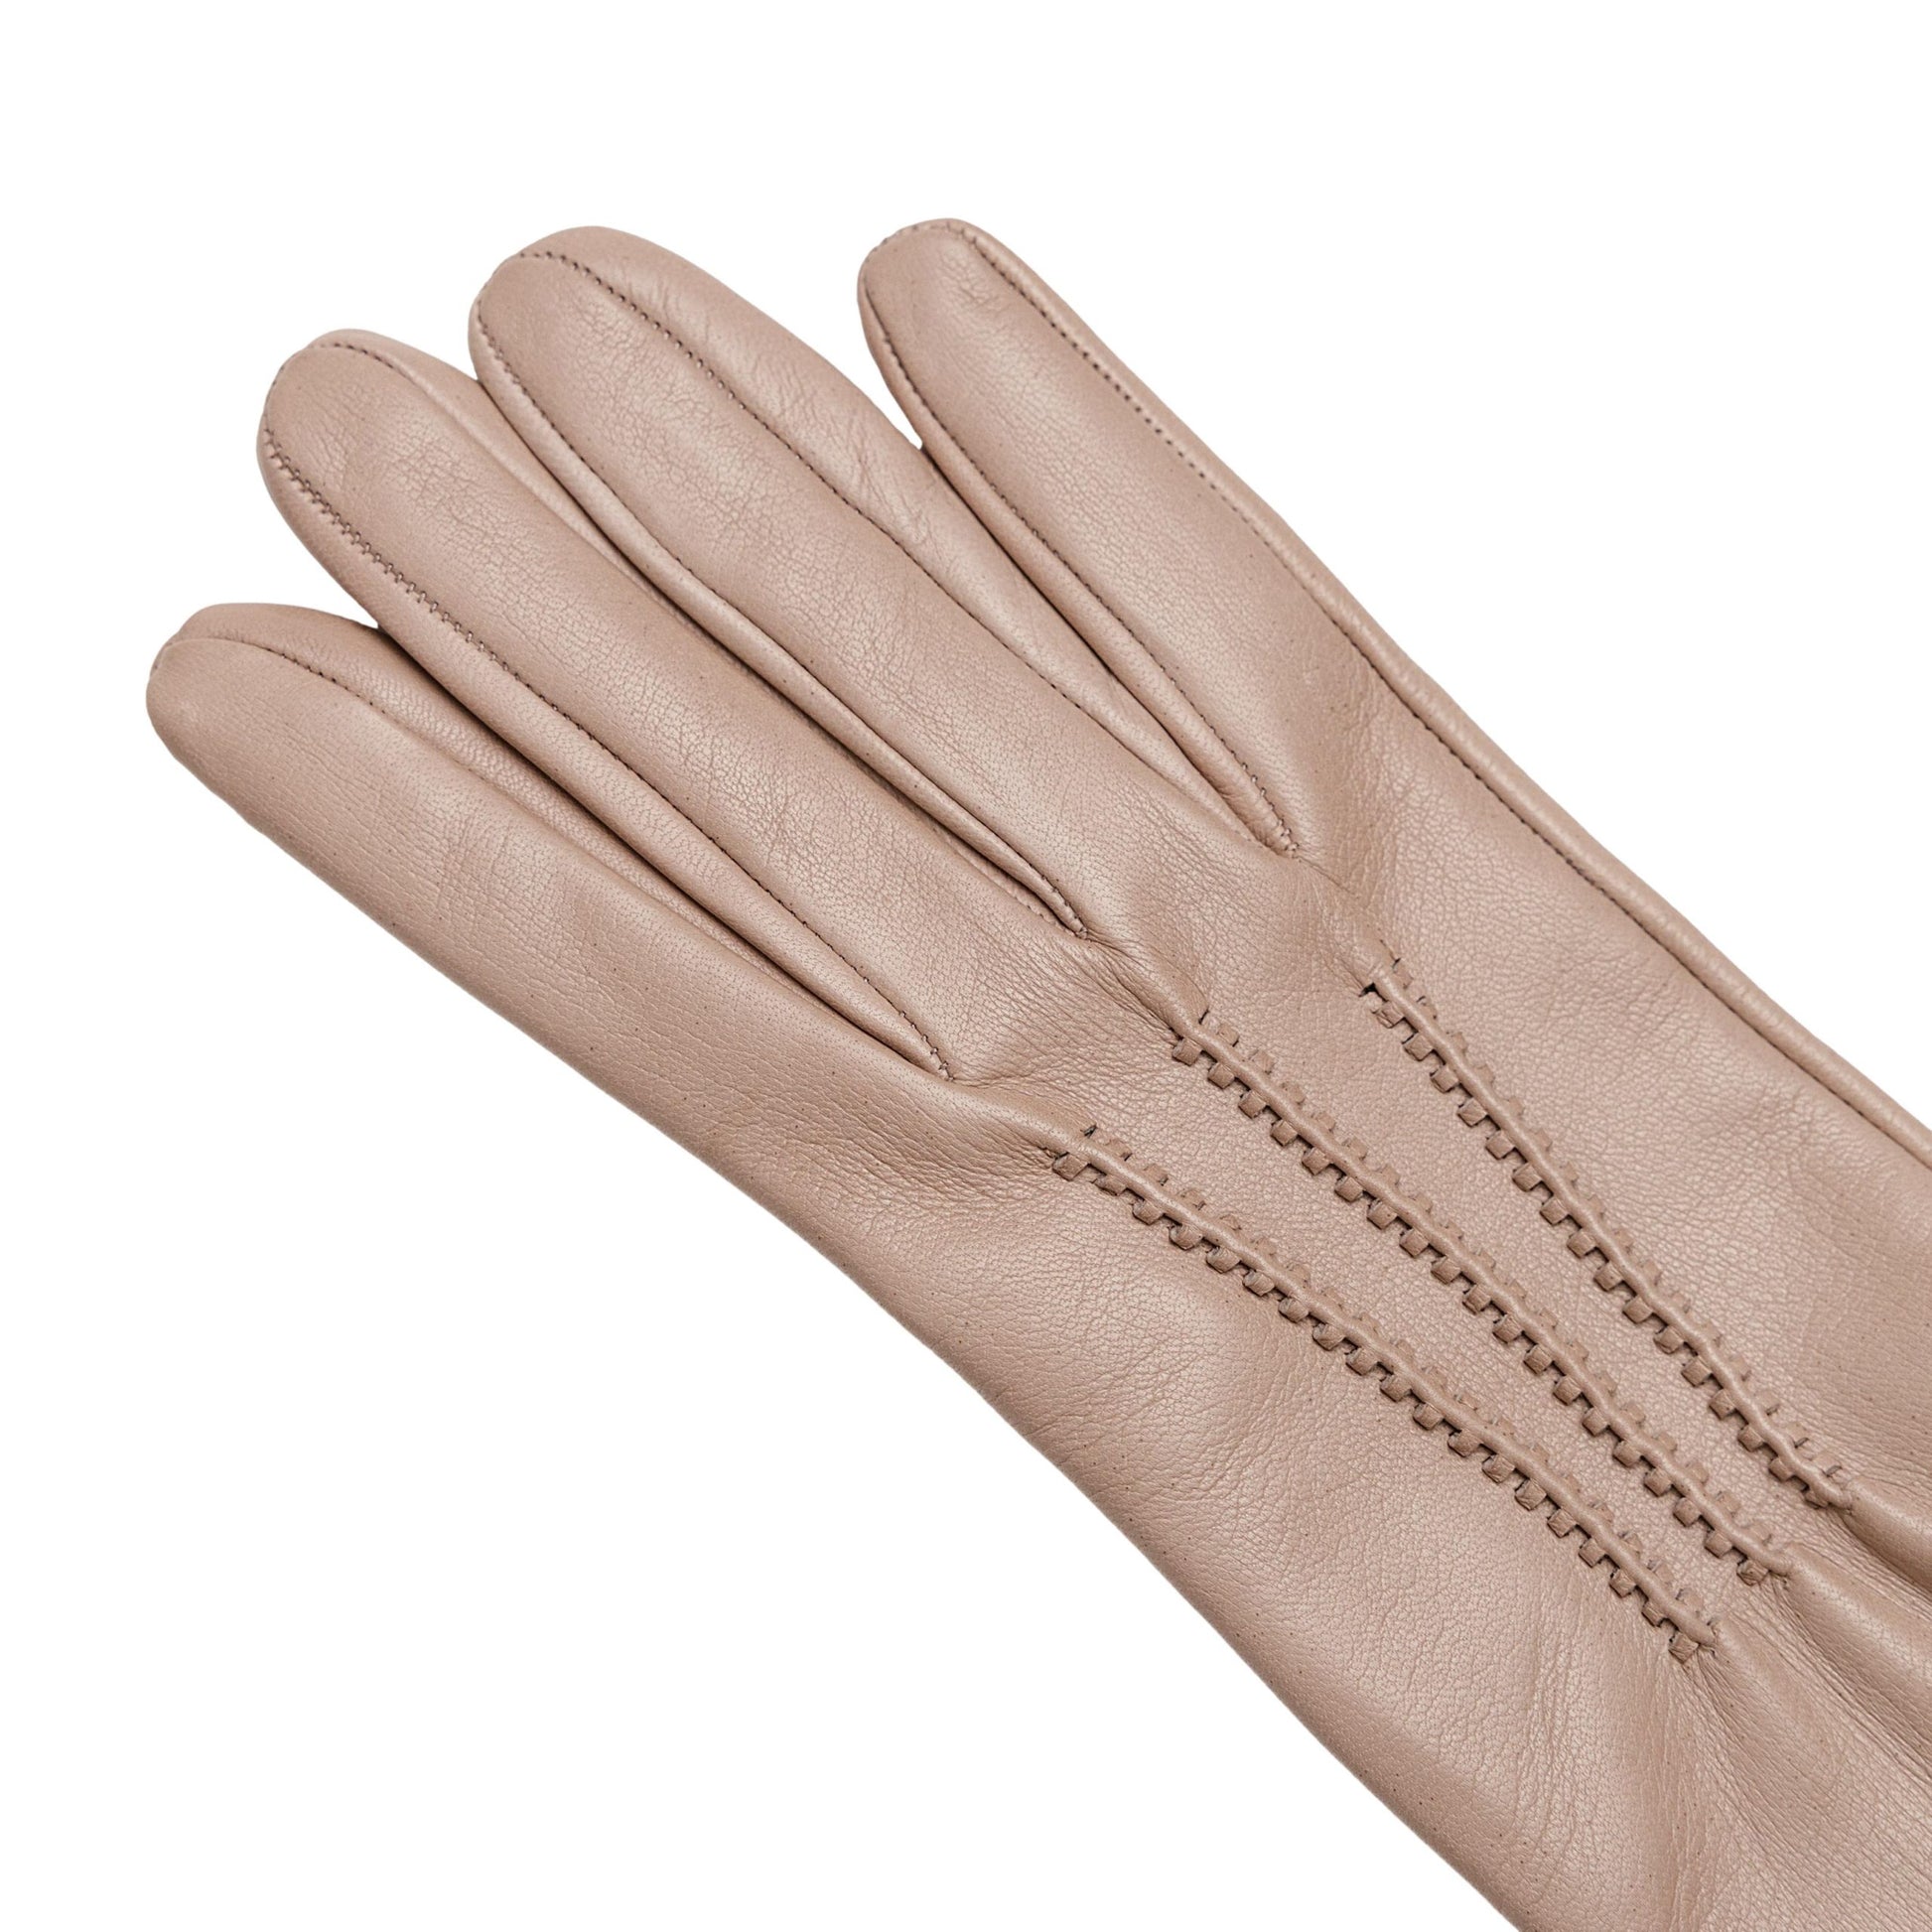 Women's pink nappa elegant gloves long to elbow and silk lined